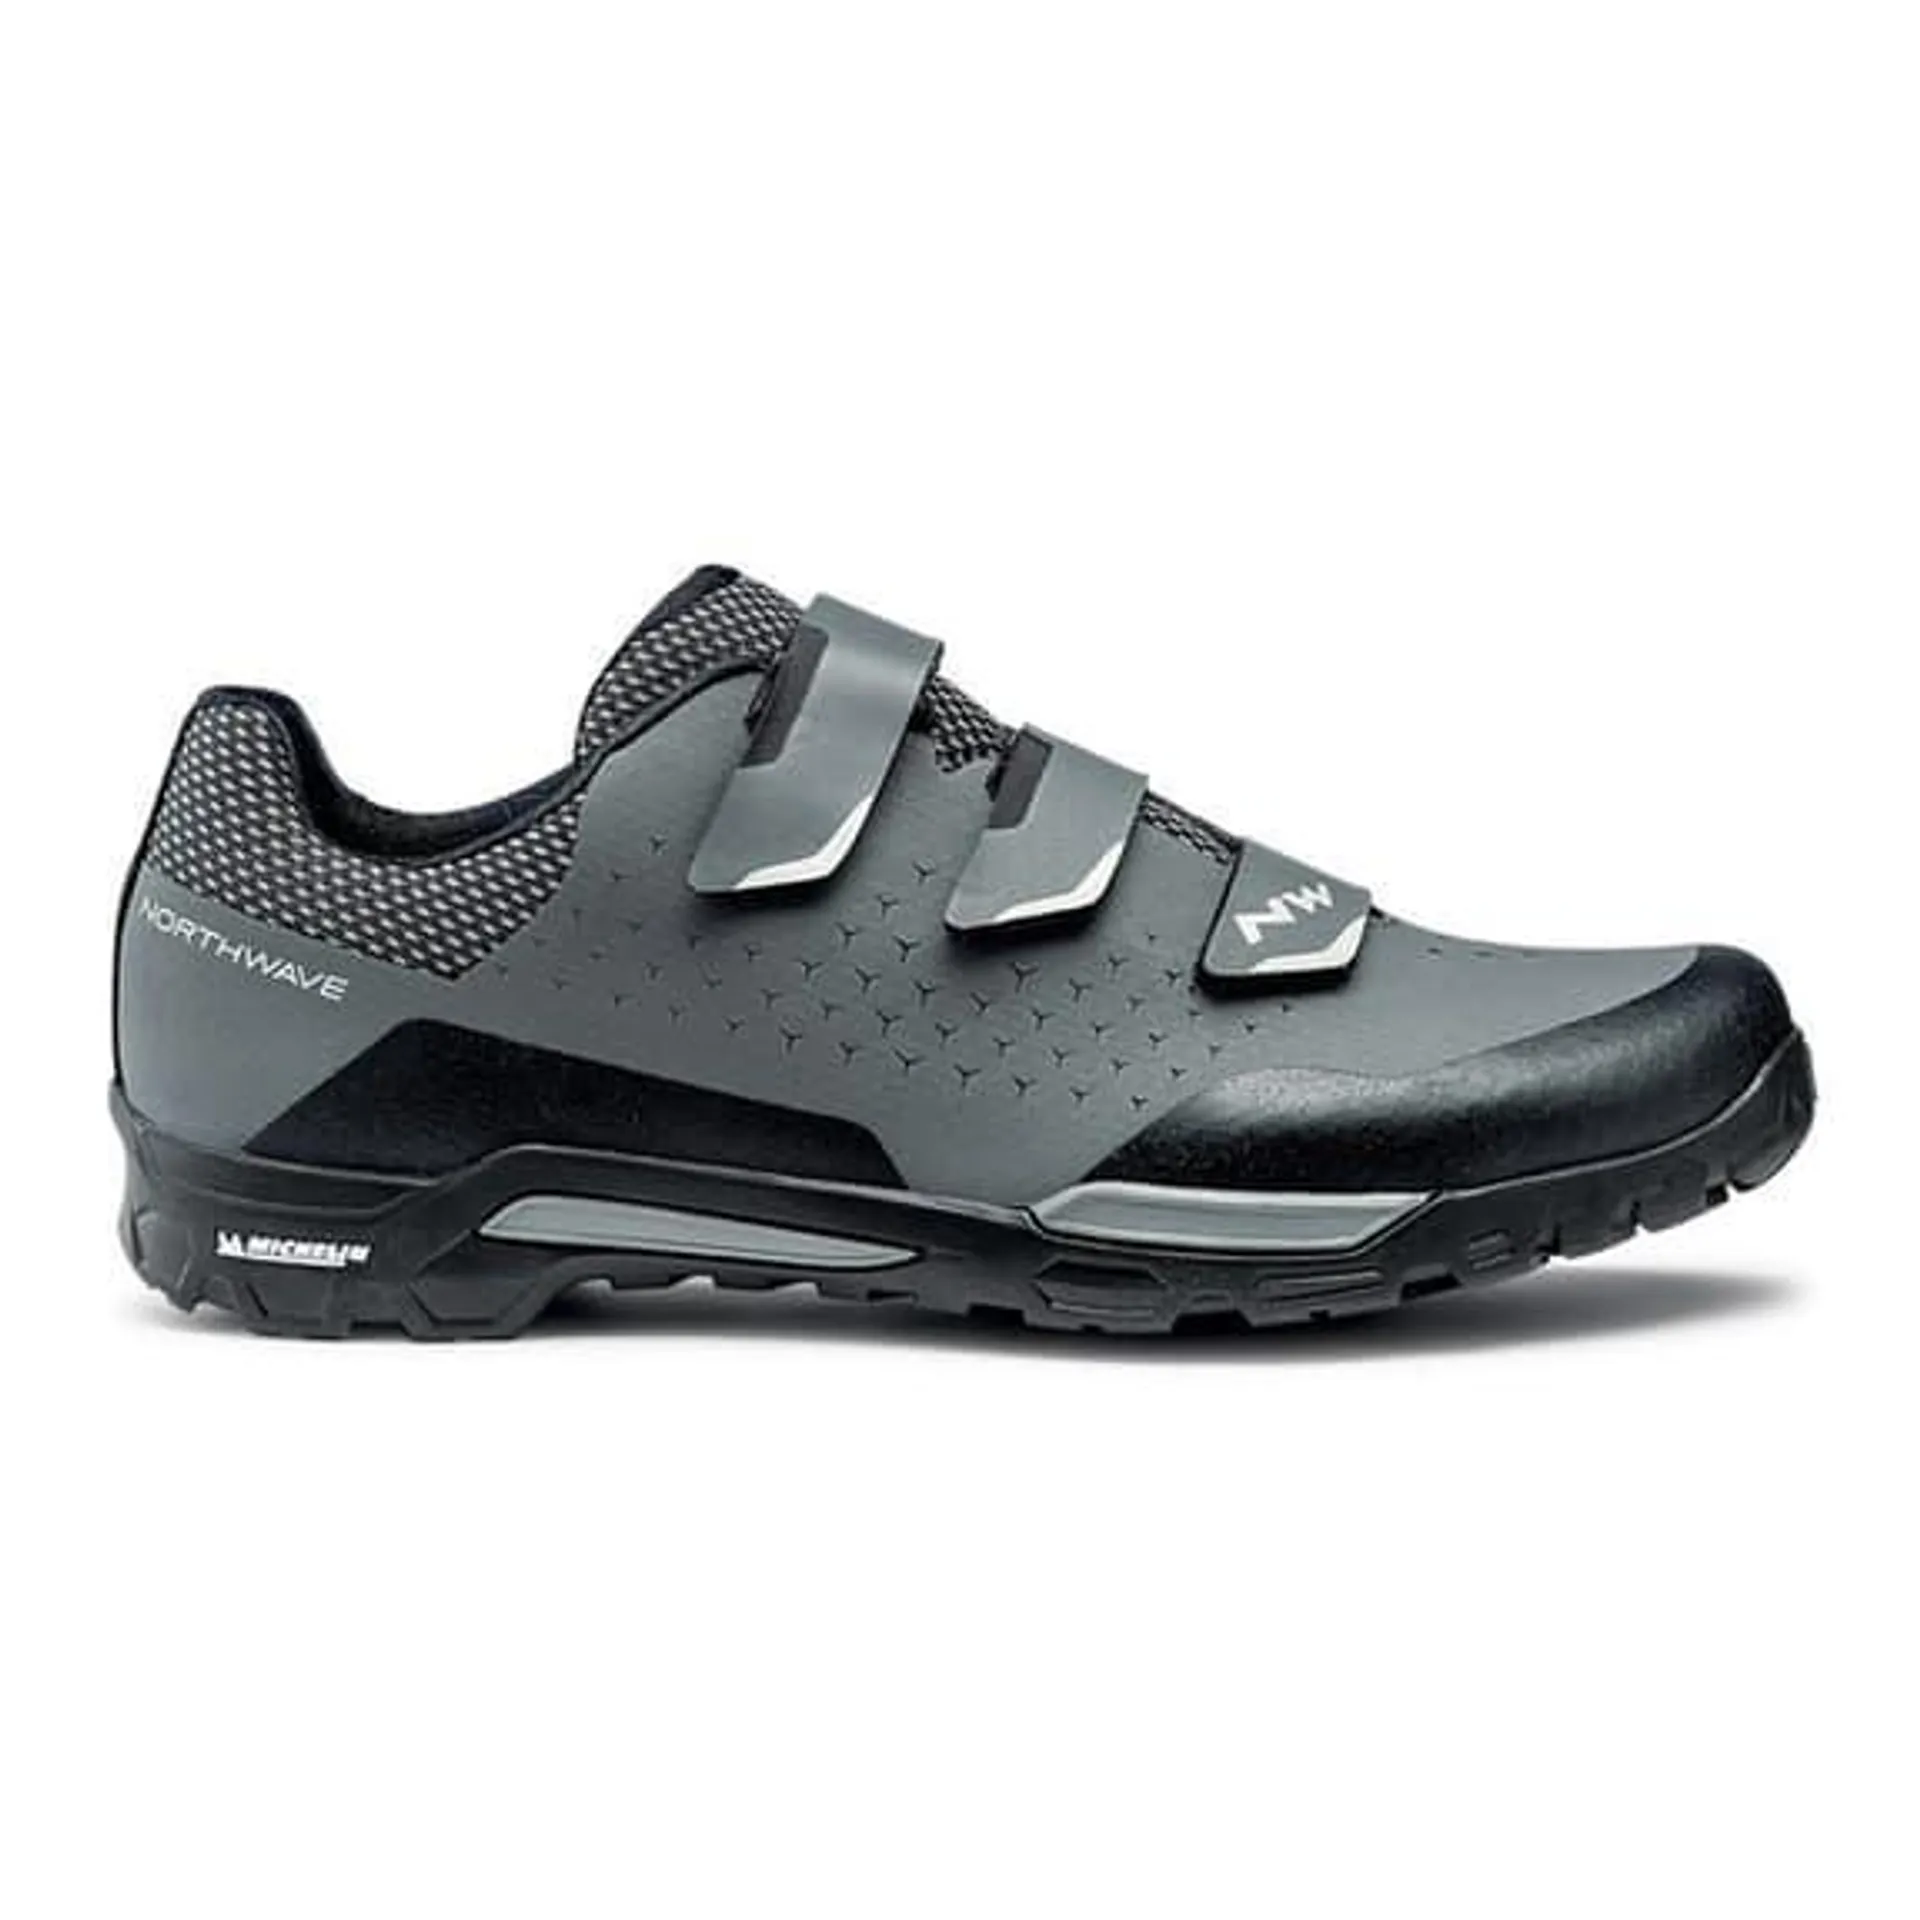 Chaussures Northwave X-Trail anthracite